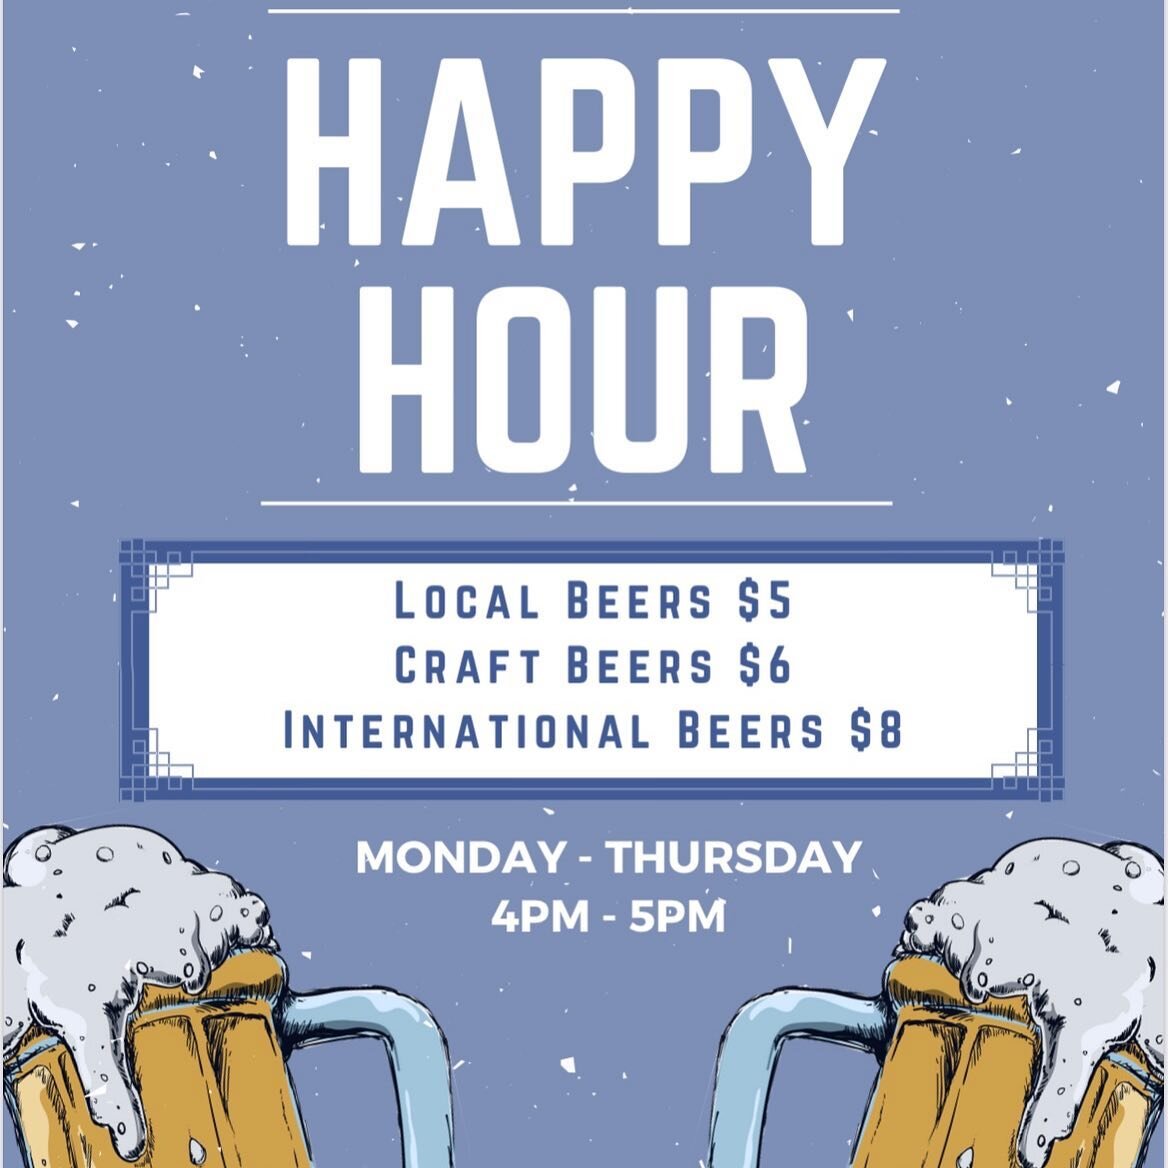 Happy Hour Beers Monday - Thursday 4-5pm 🍻